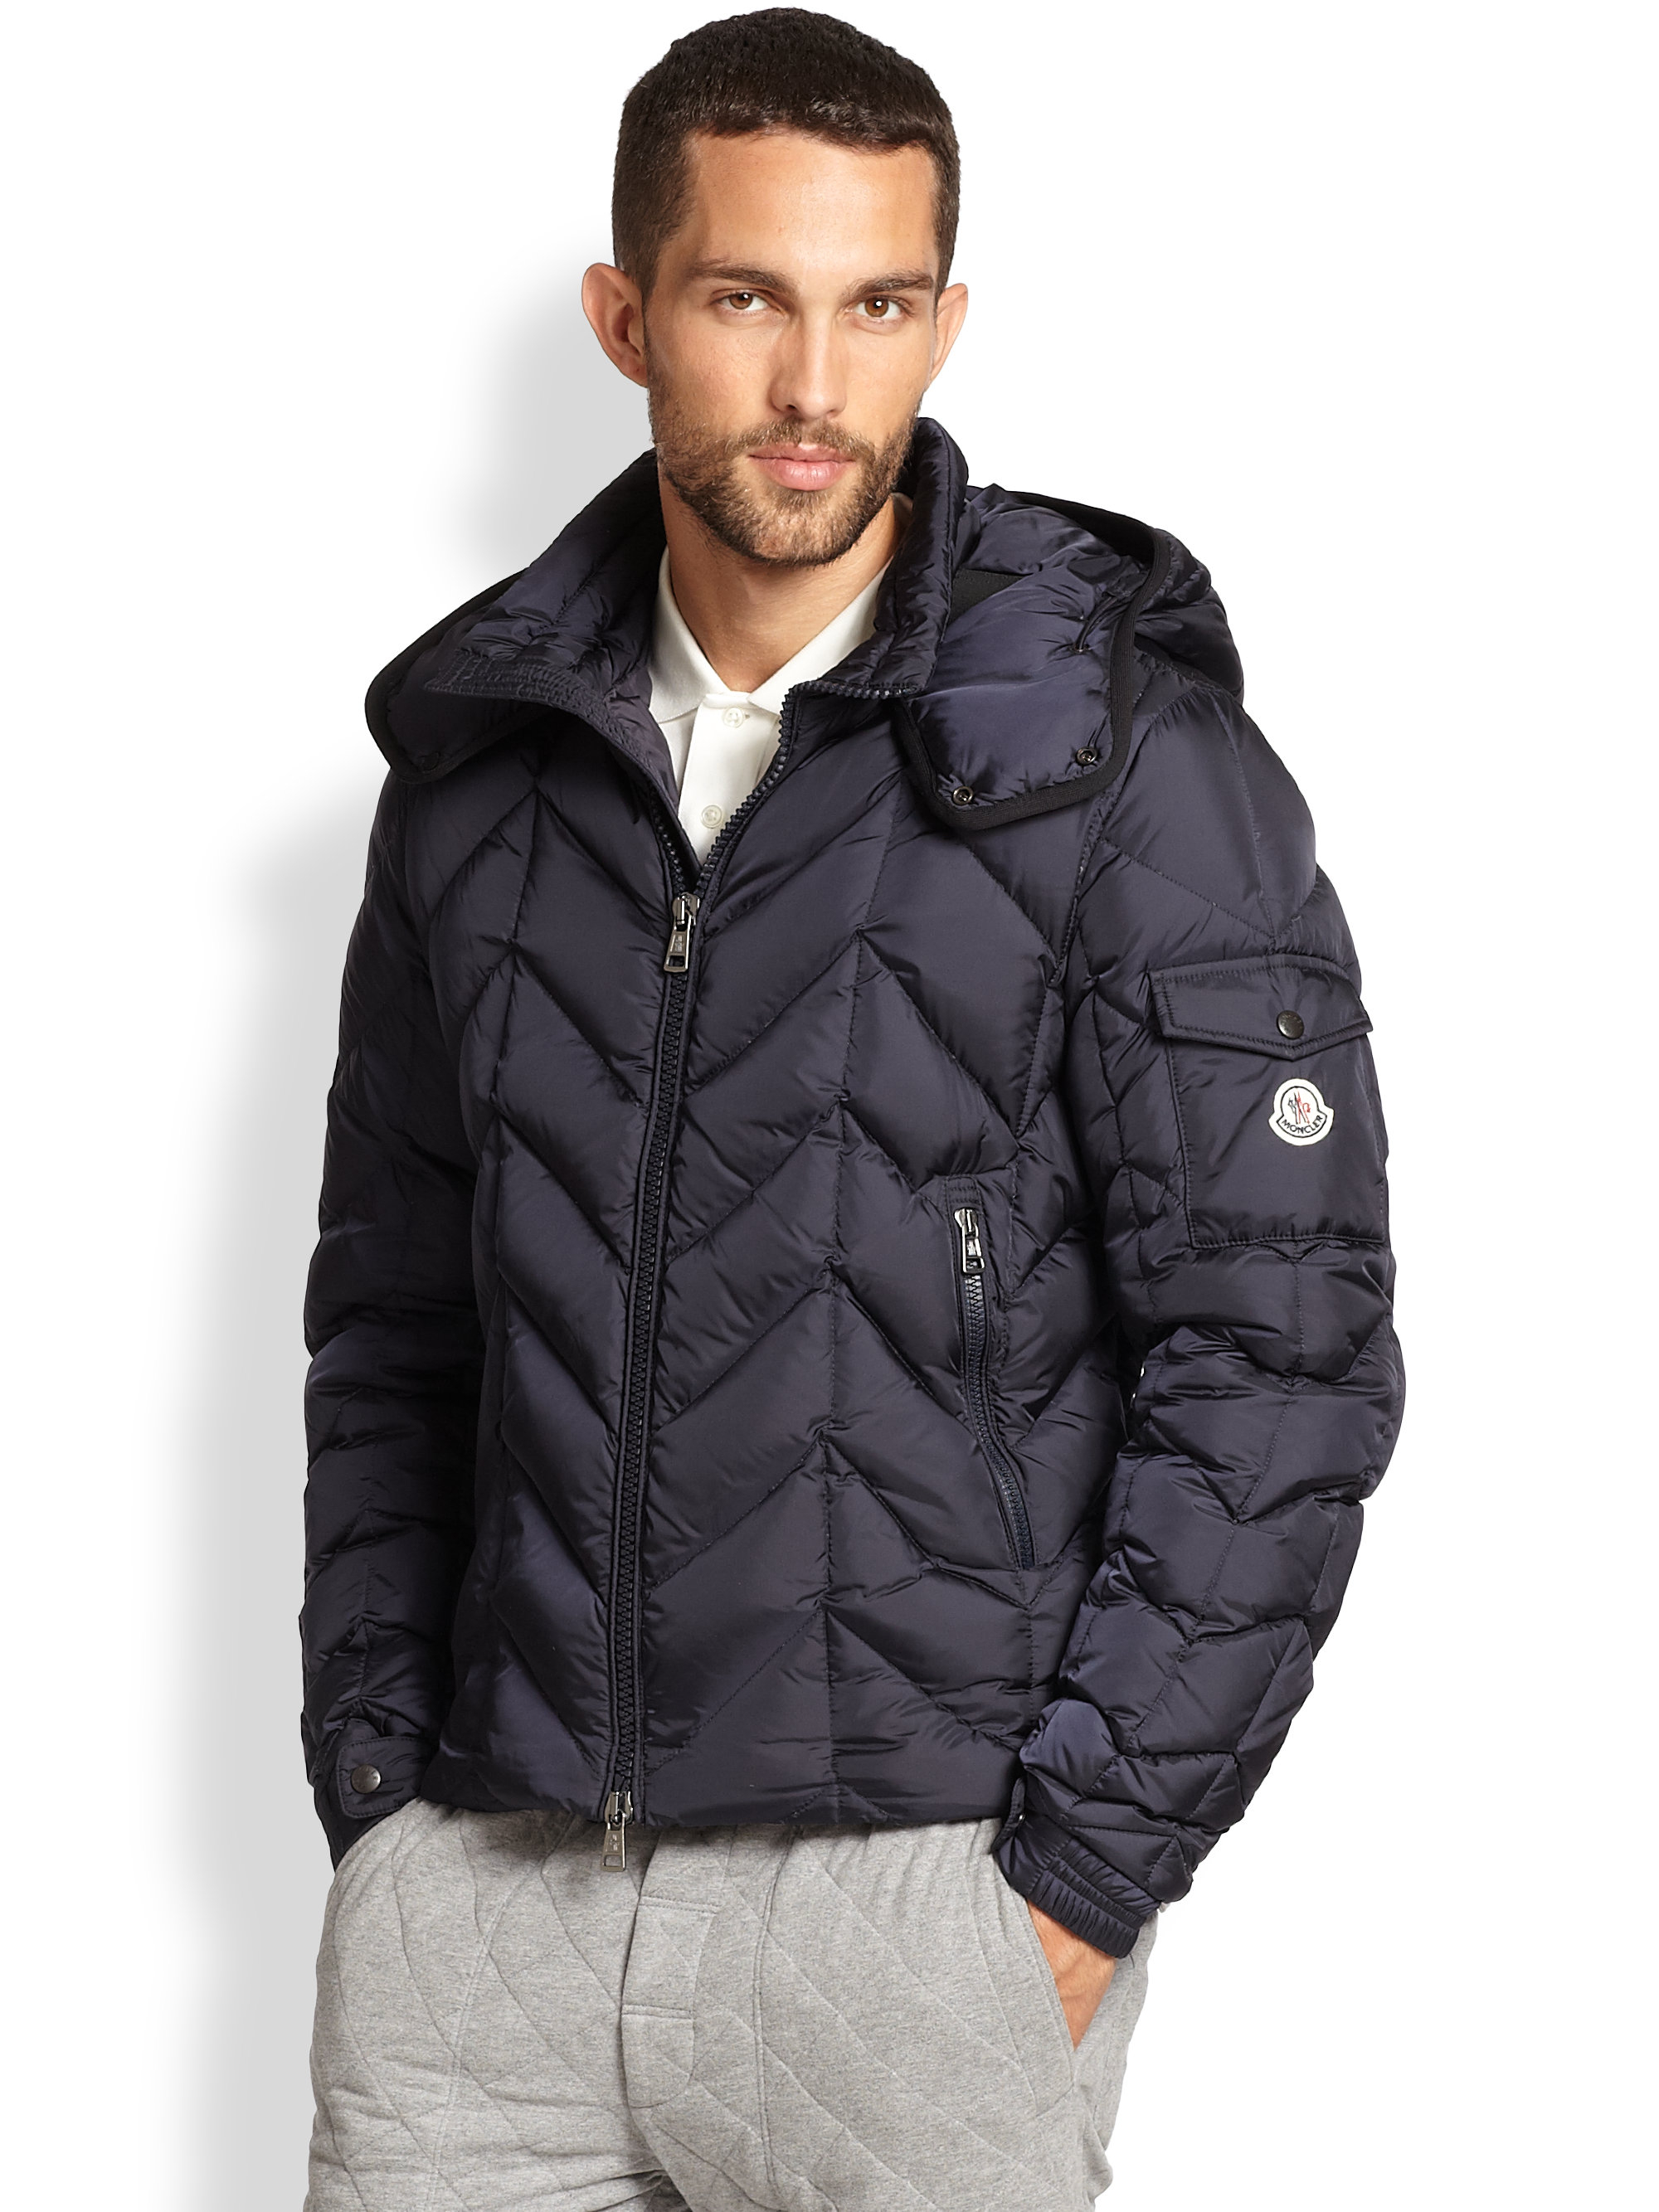 Lyst - Moncler Chevron Quilted Puffer Jacket in Blue for Men